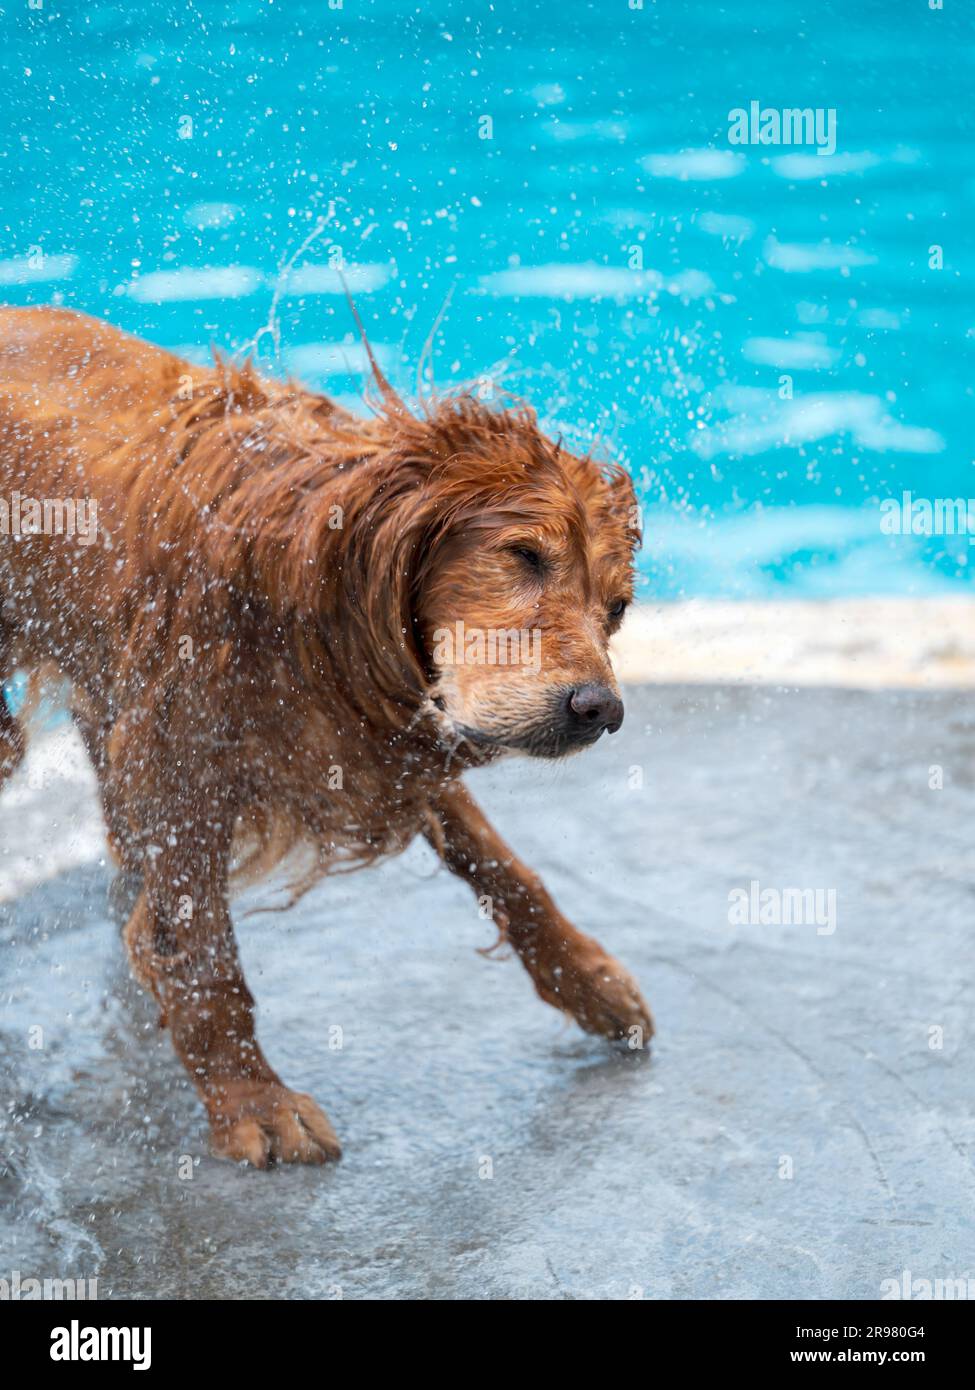 Wet golden retriever flicking water by the pool Stock Photo